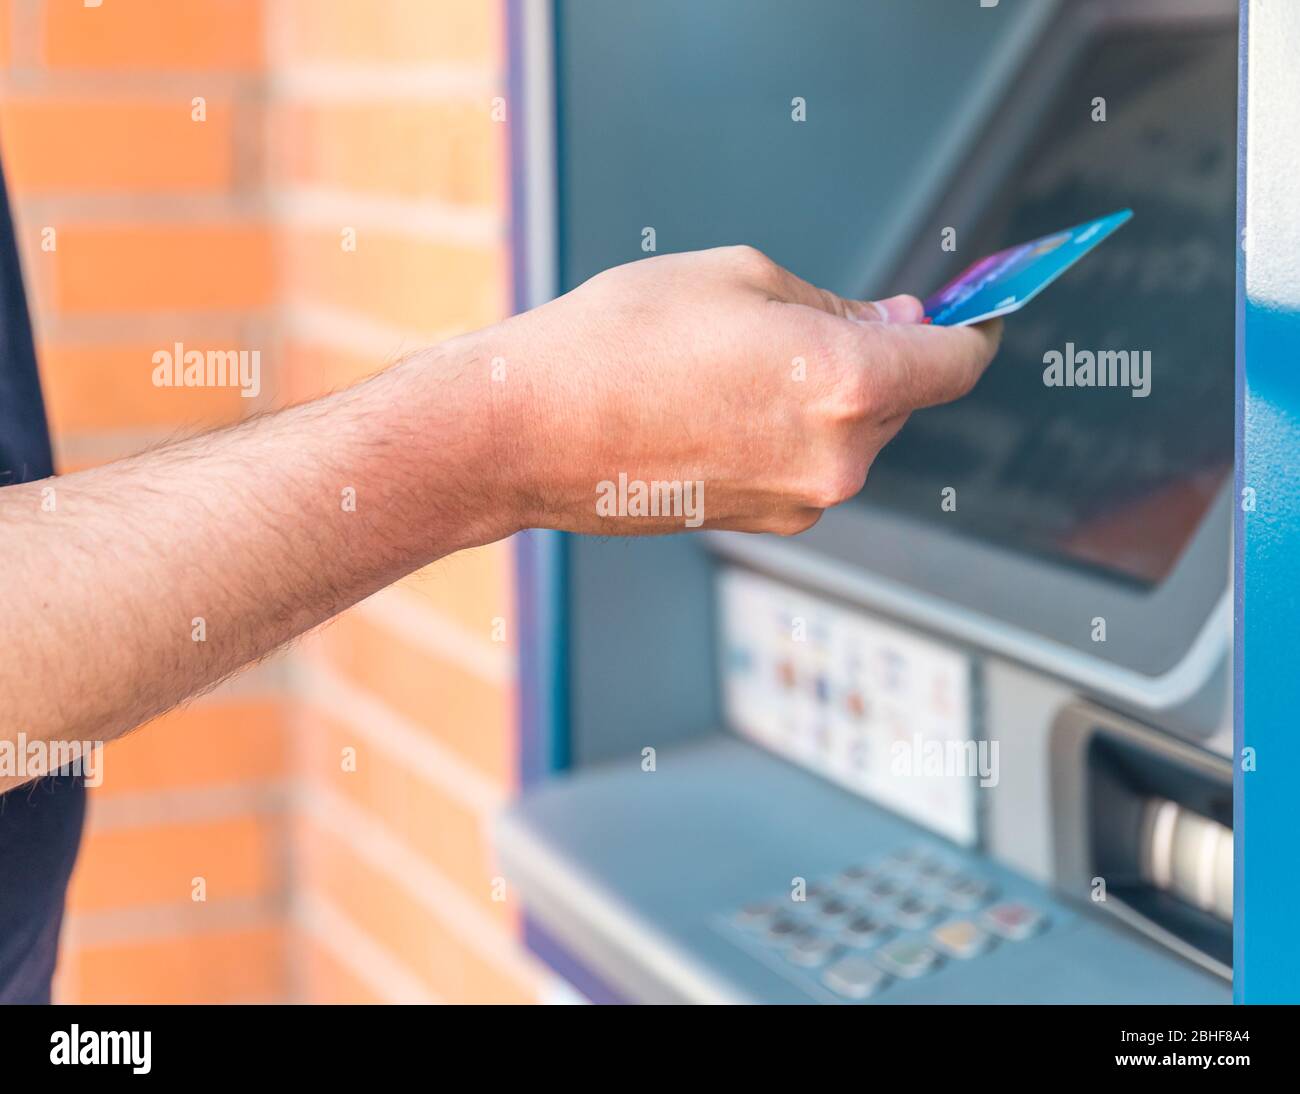 Keypad Atm High Resolution Stock Photography and Images - Page 5 - Alamy